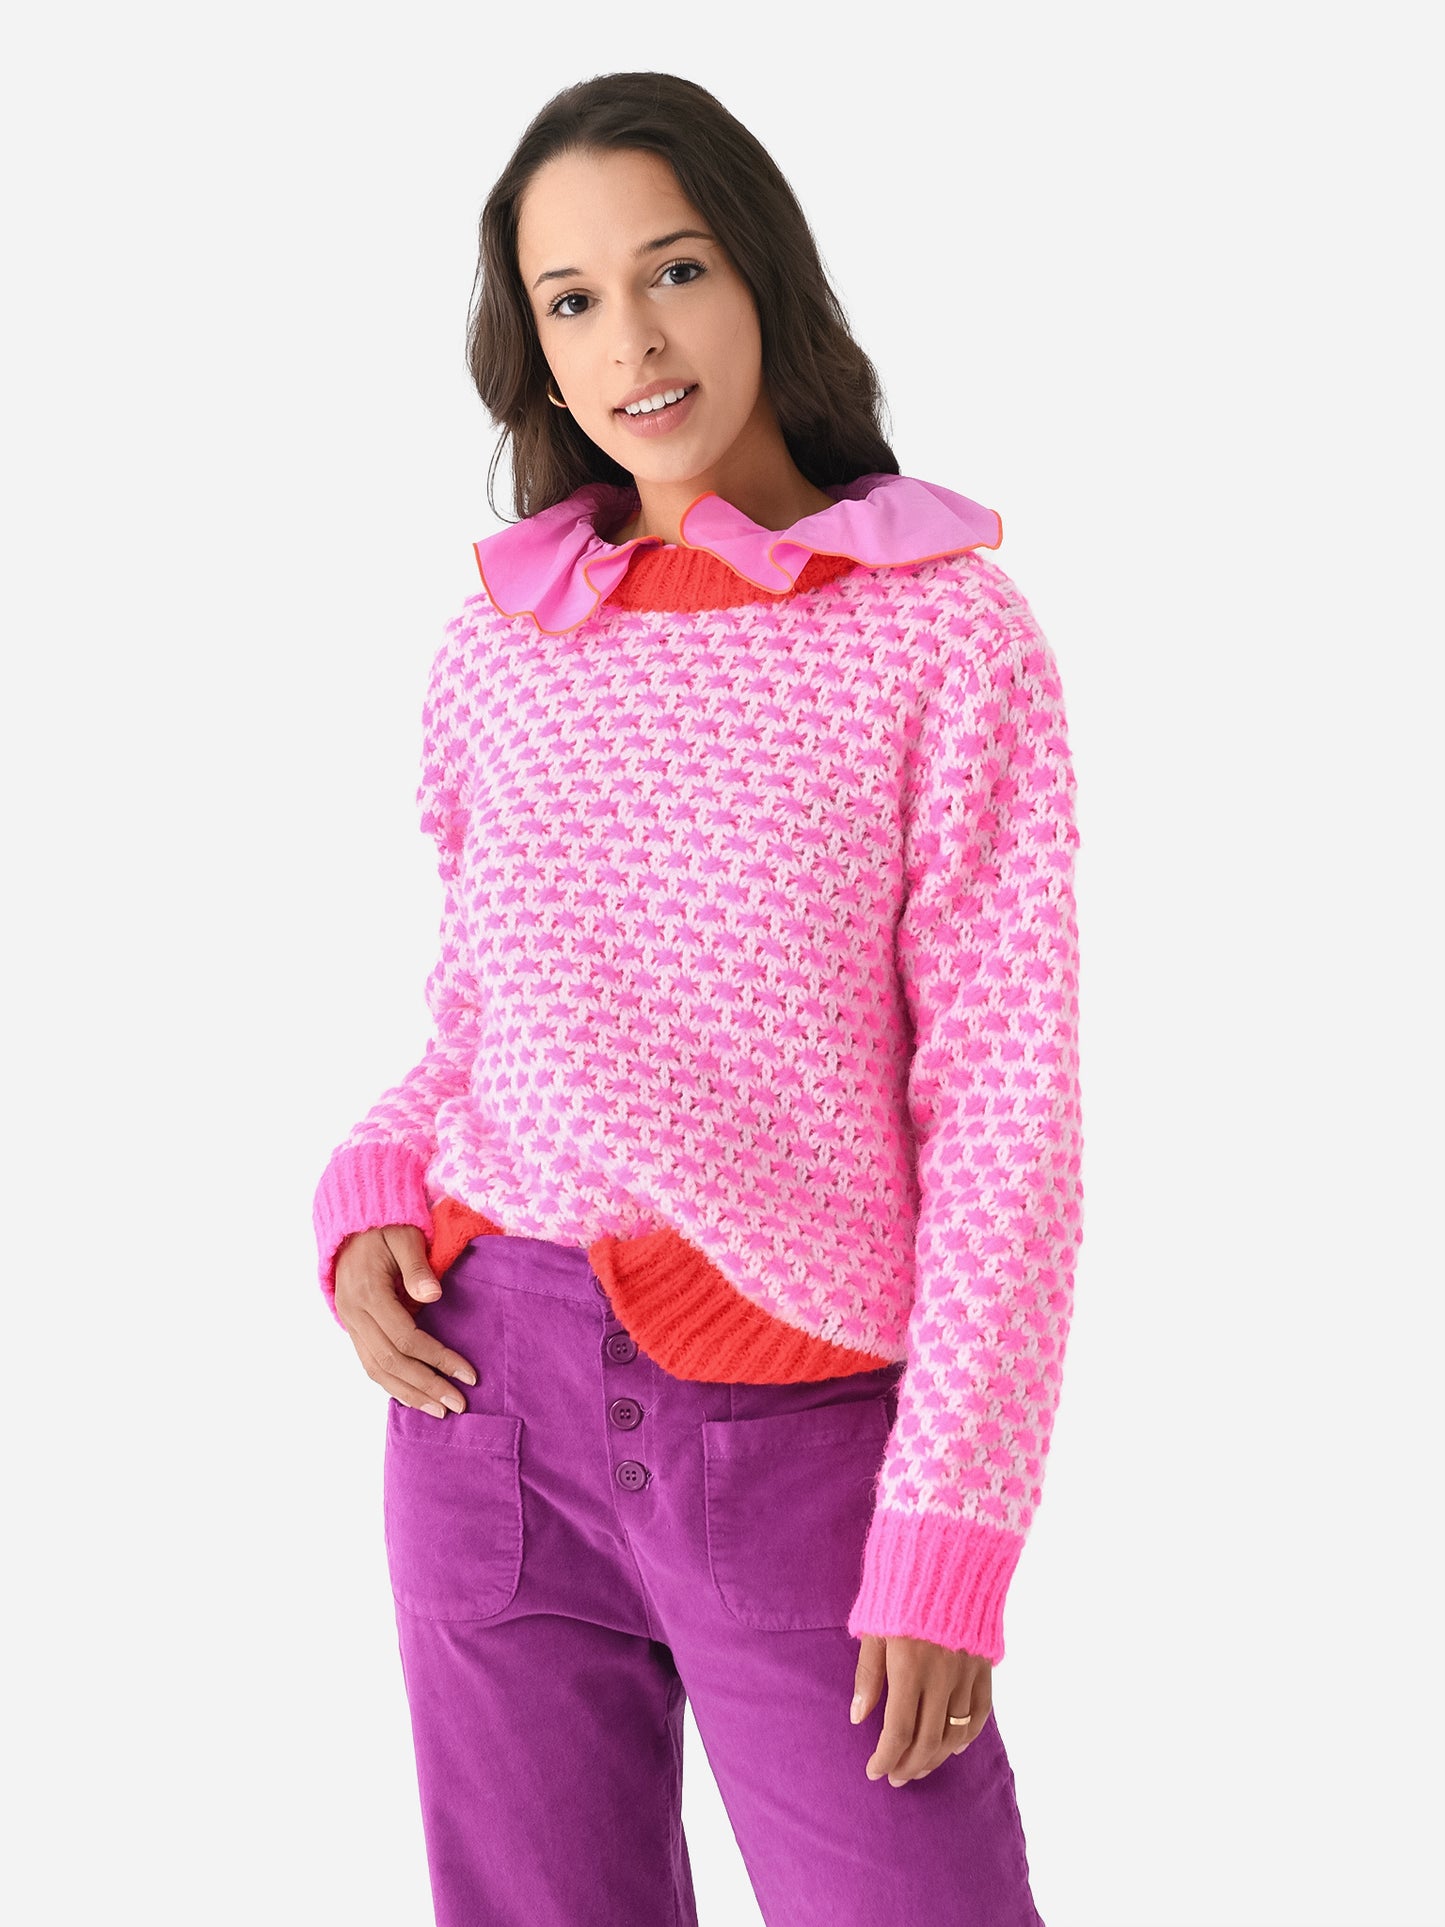 Dr Bloom Women's Cancan Sweater